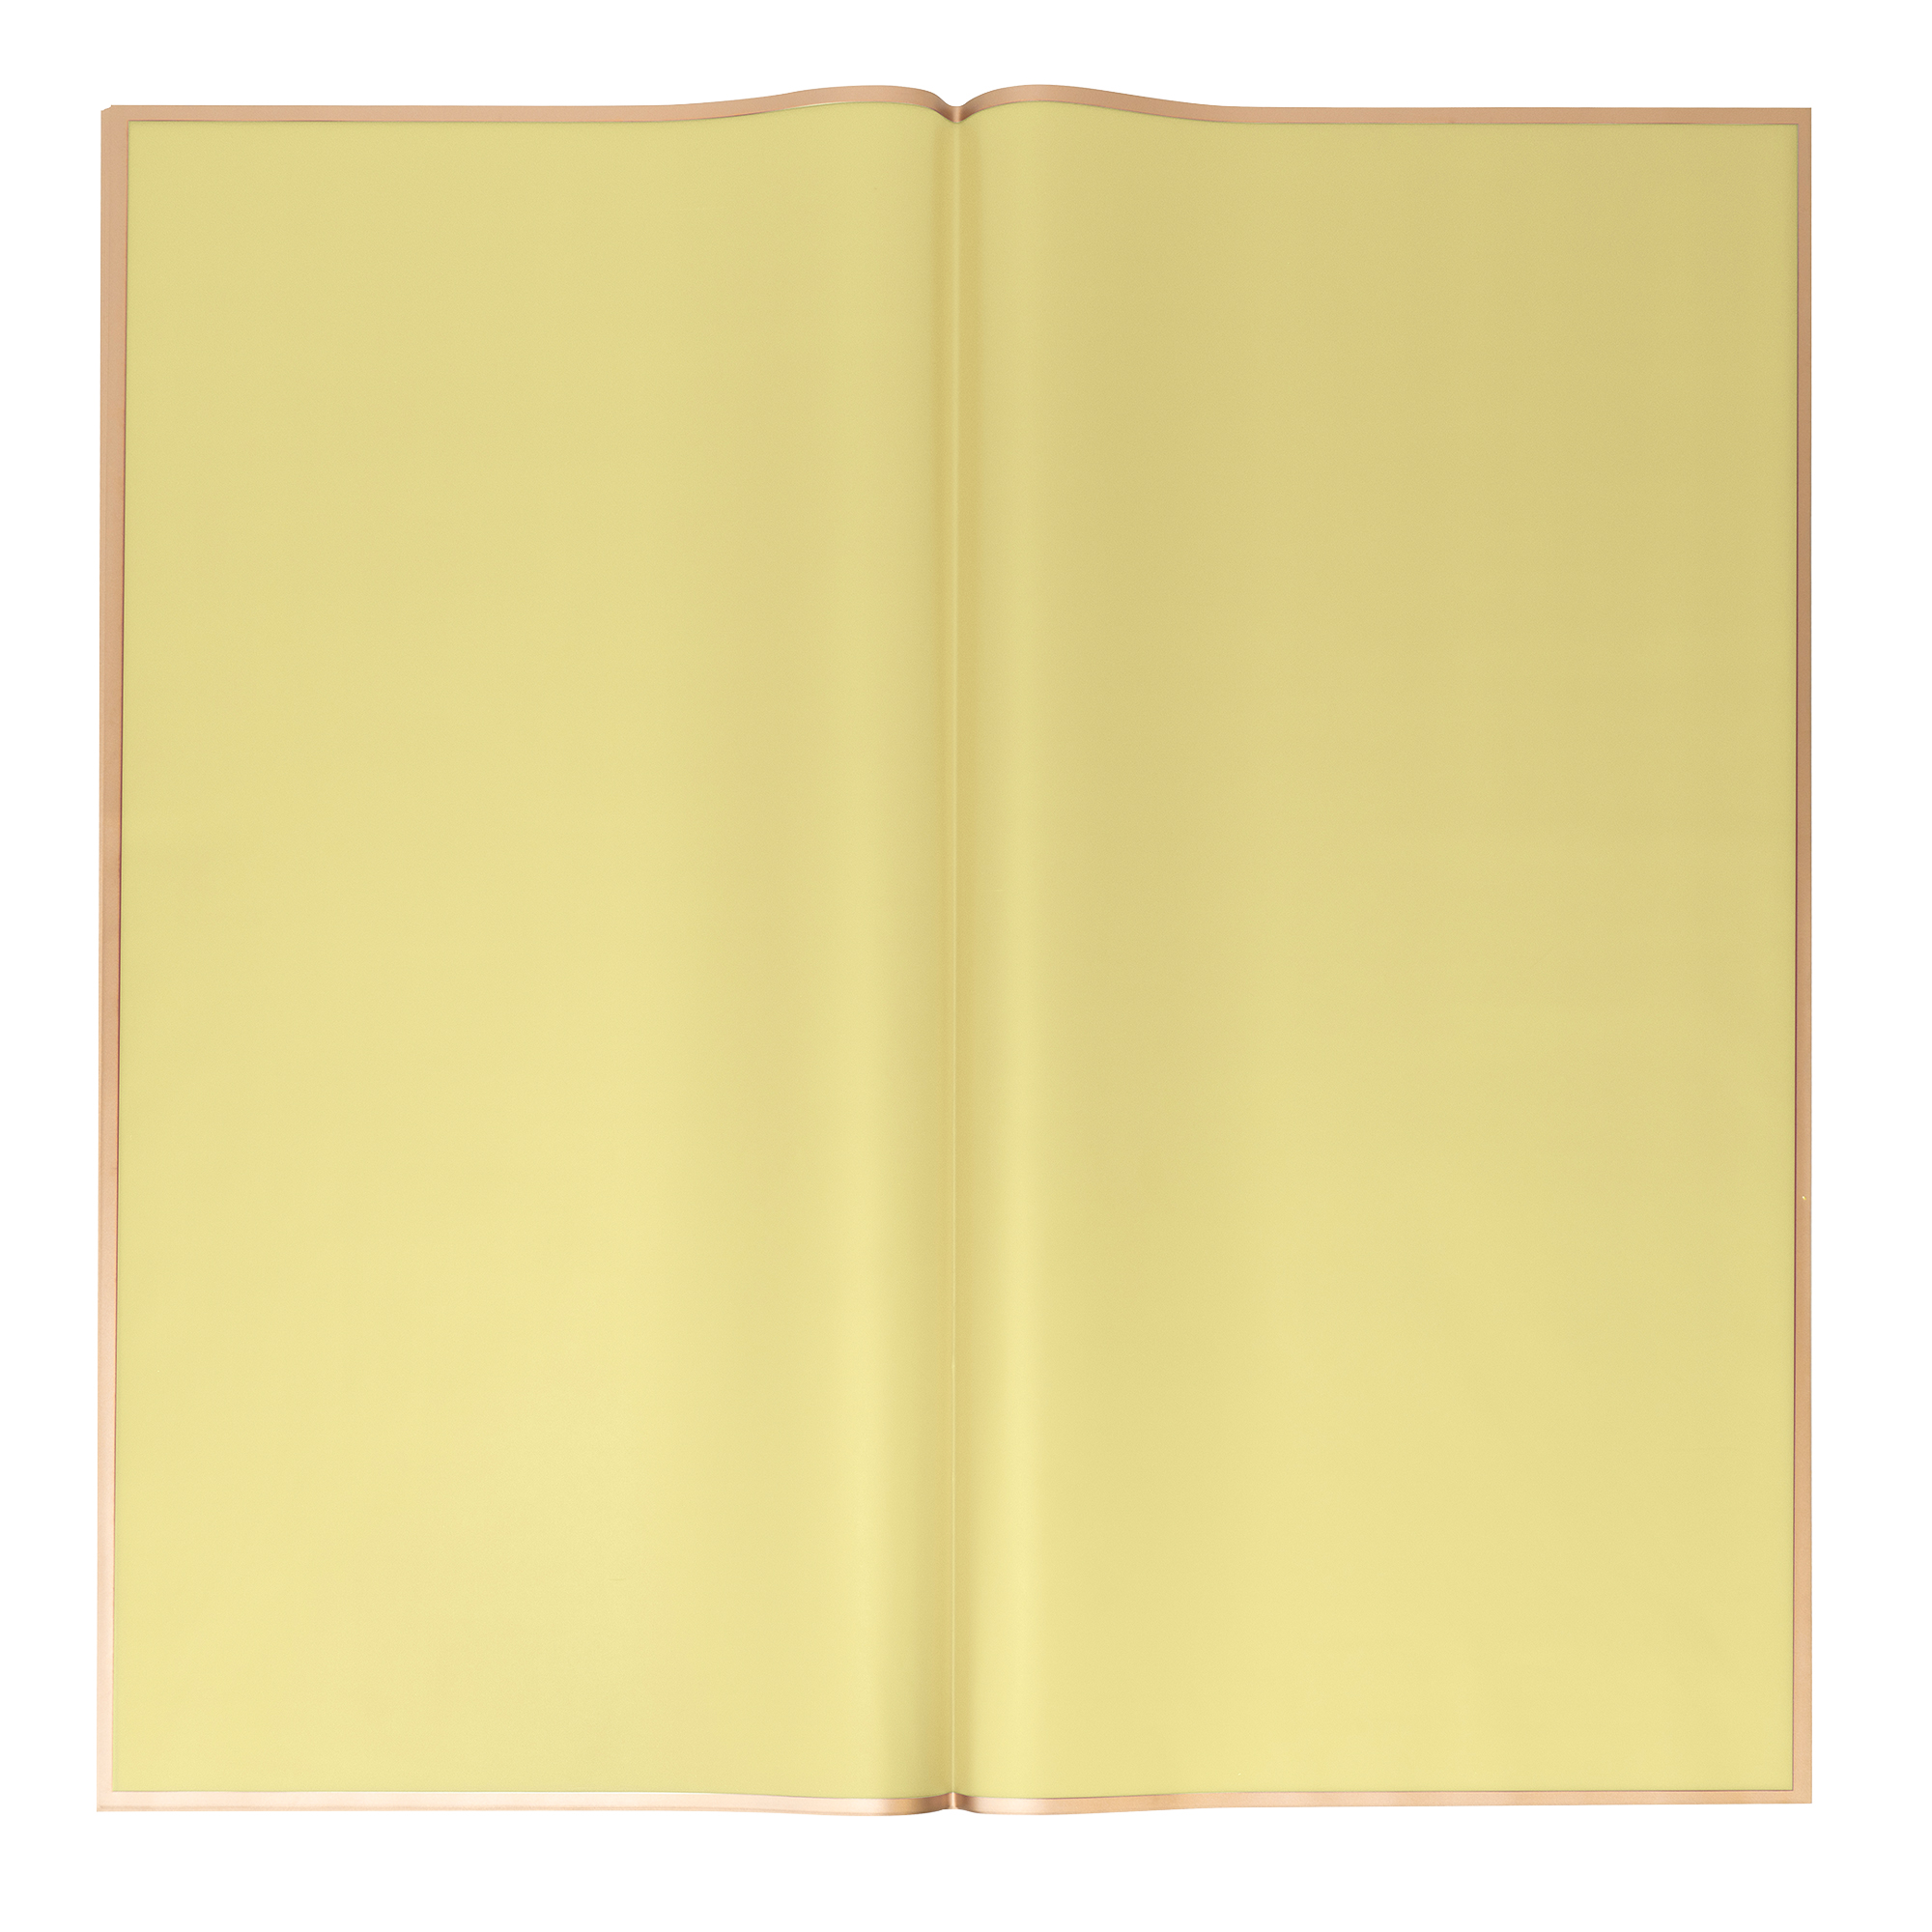 Floral Wrapping Paper With Gold Edge 20pc/pack  - Yellow